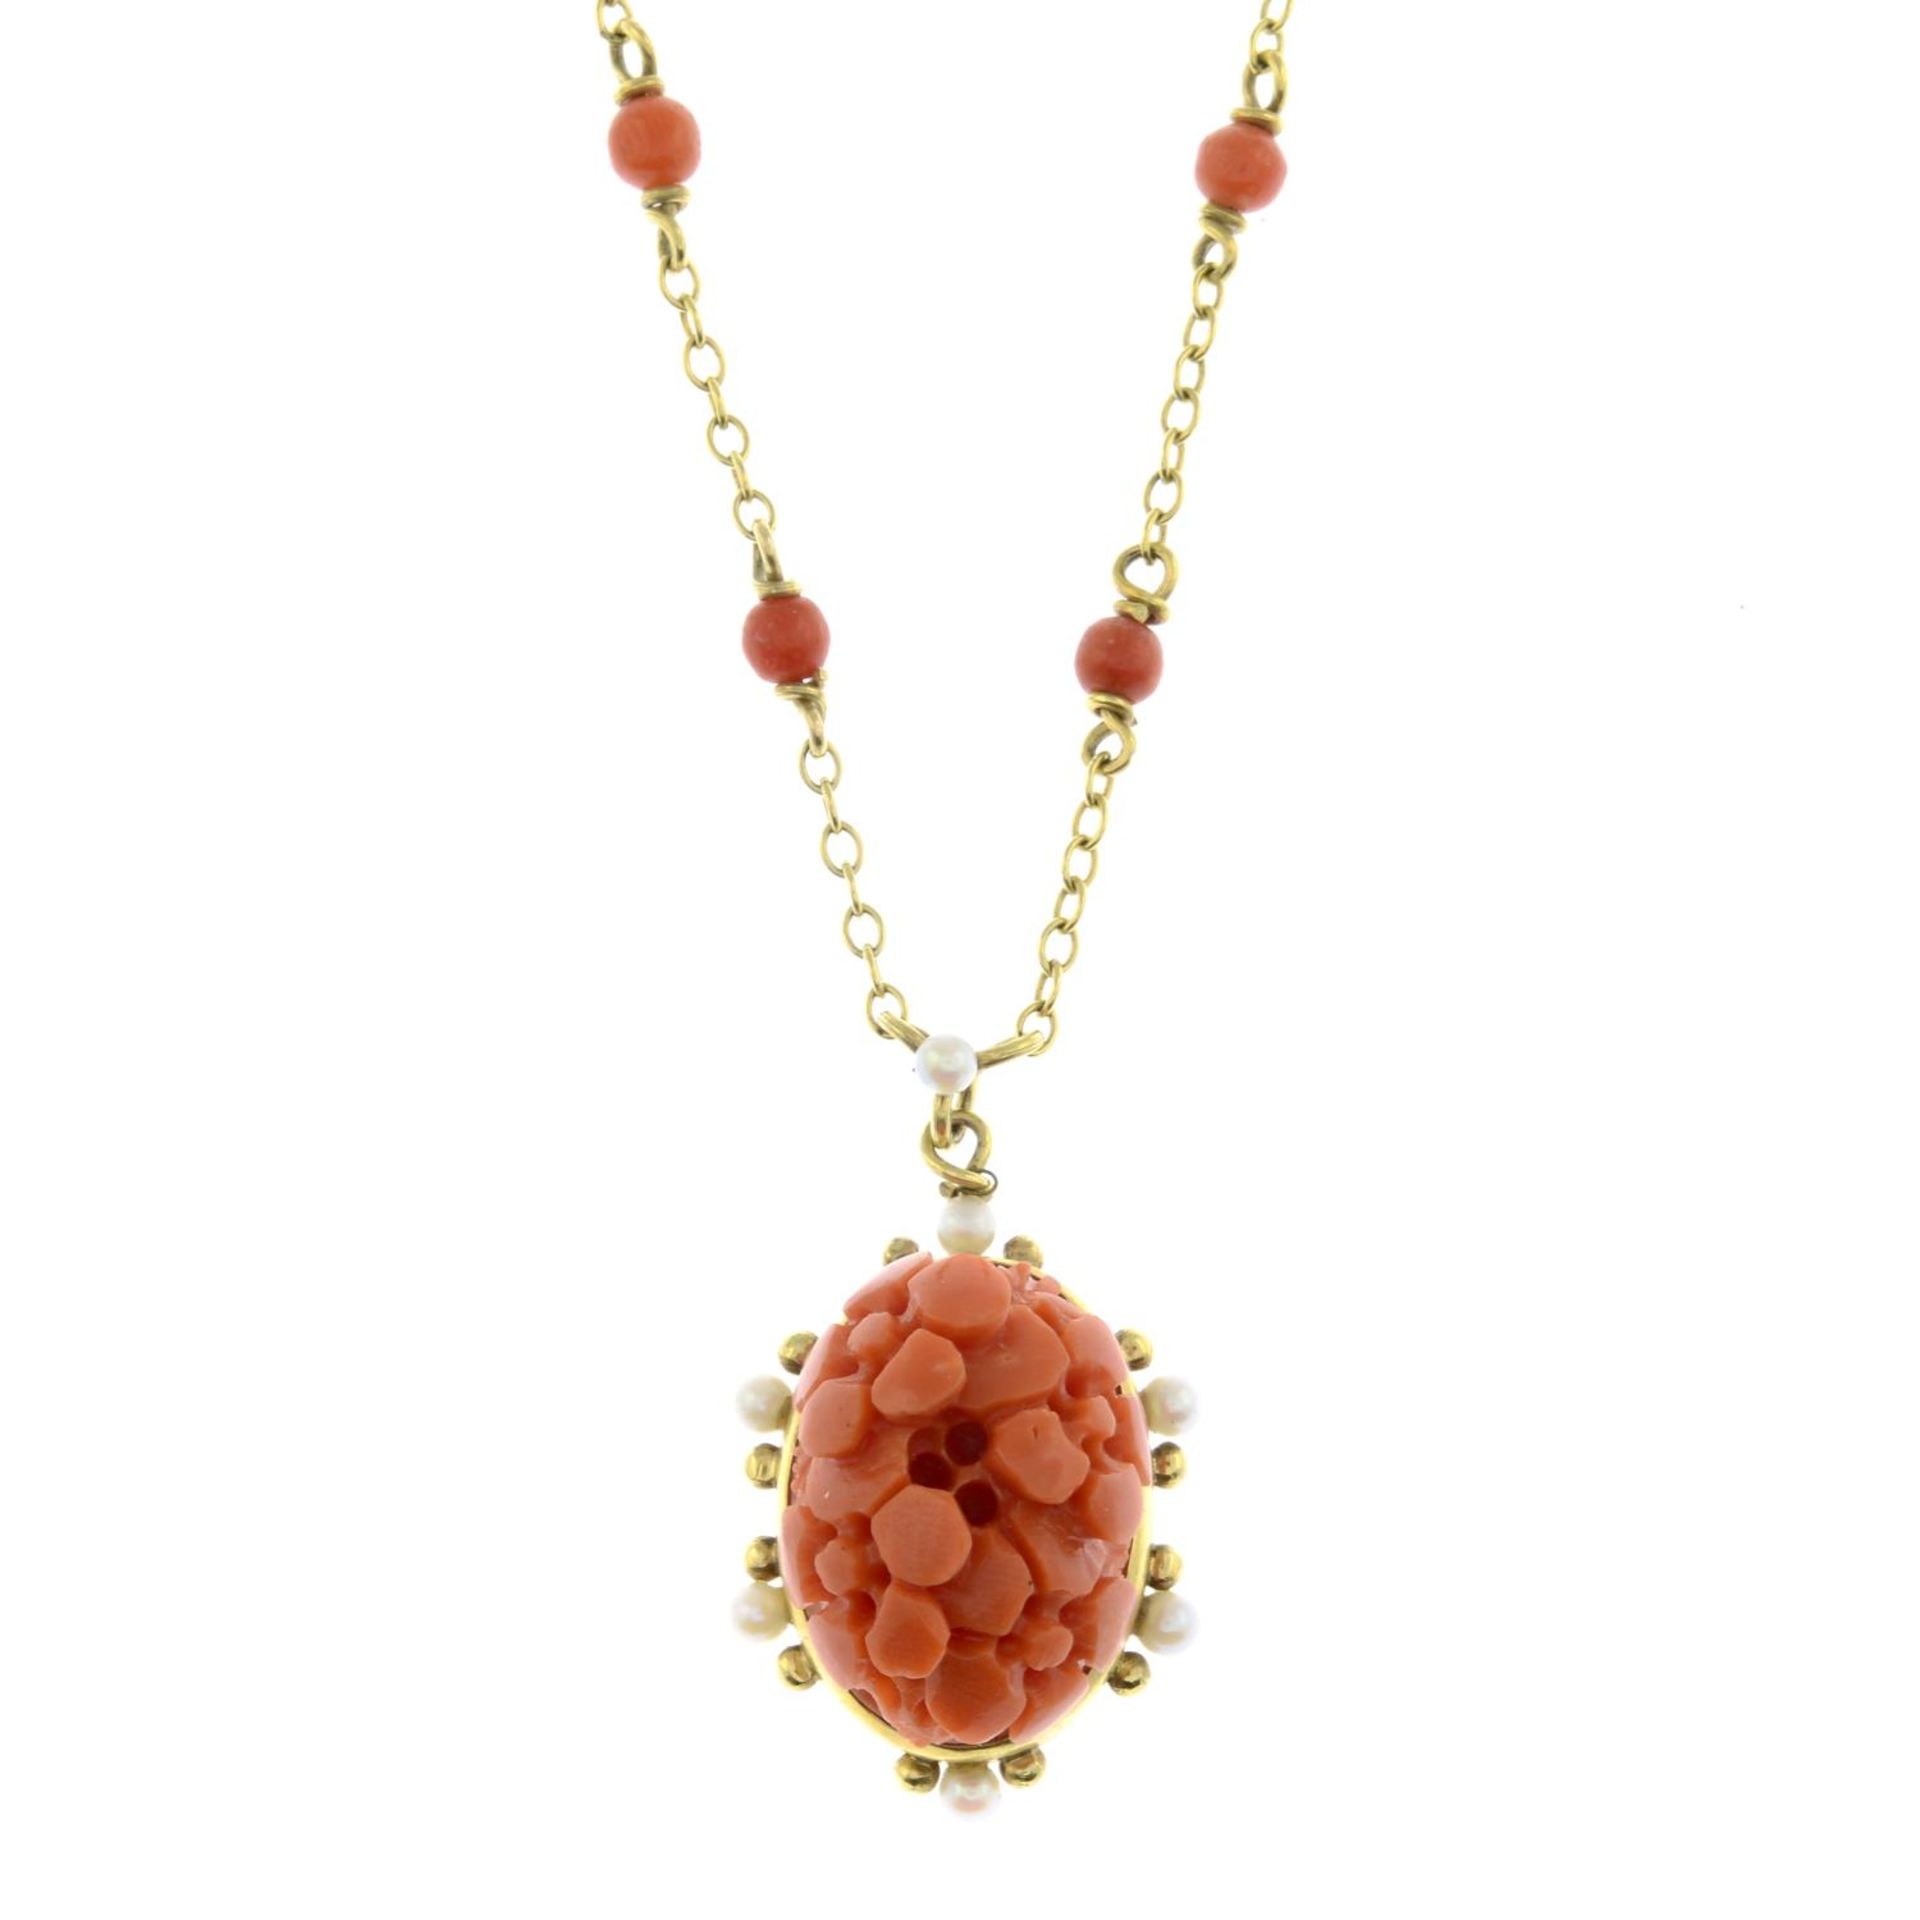 A 1970s 9ct gold coral and seed pearl necklace, by Deakin & Francis.